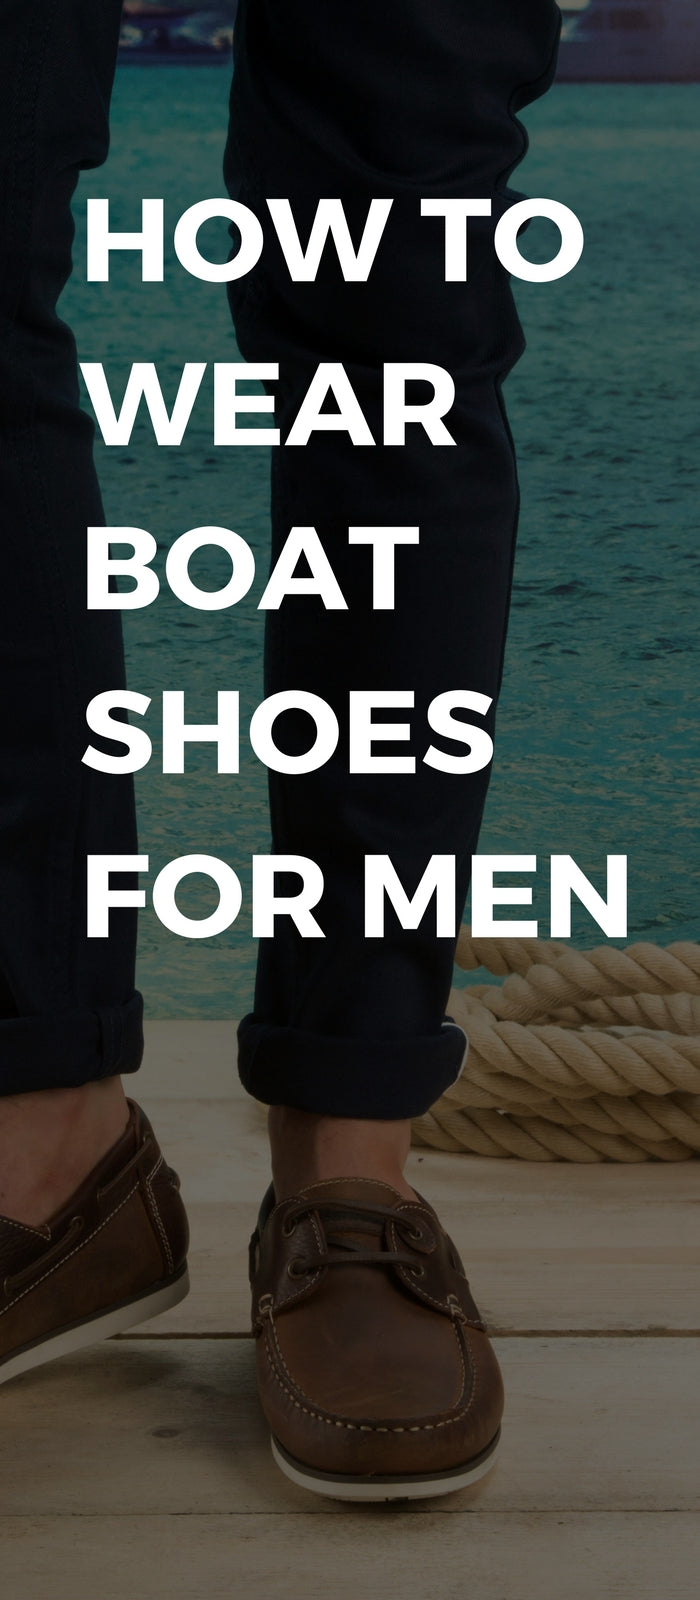 How to wear boat shoes for men 